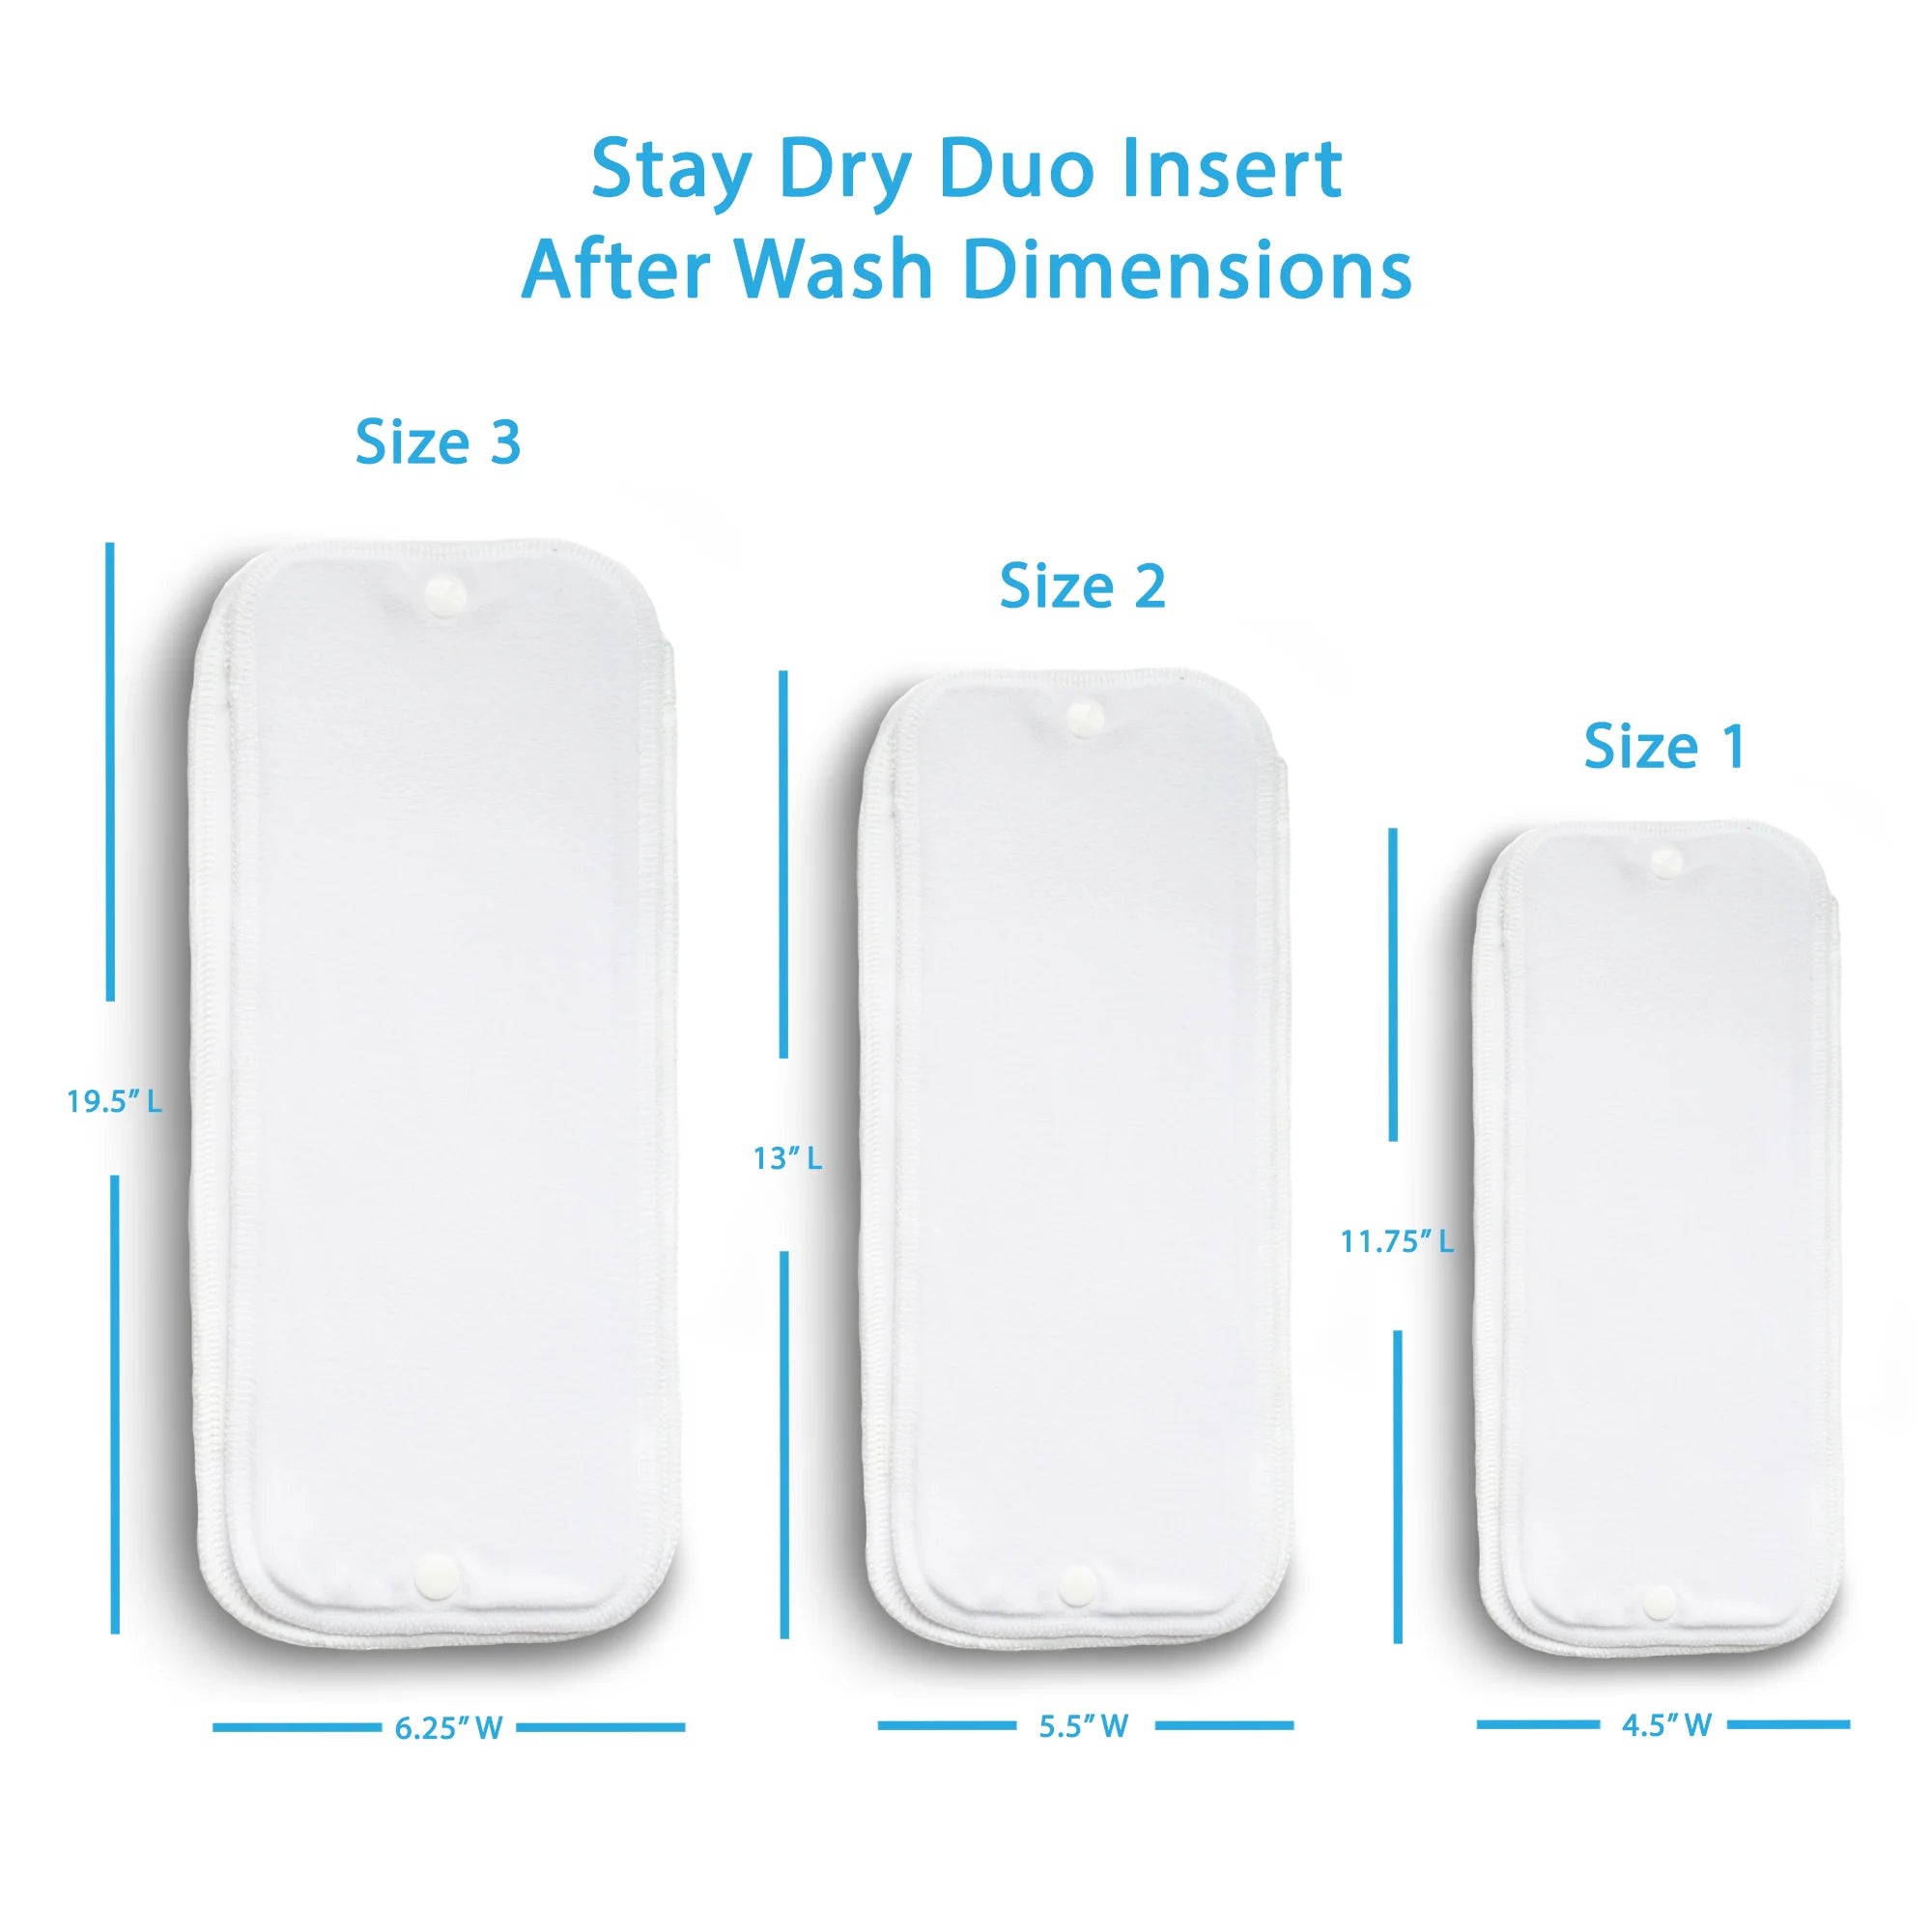 Stay Dry Duo Insert